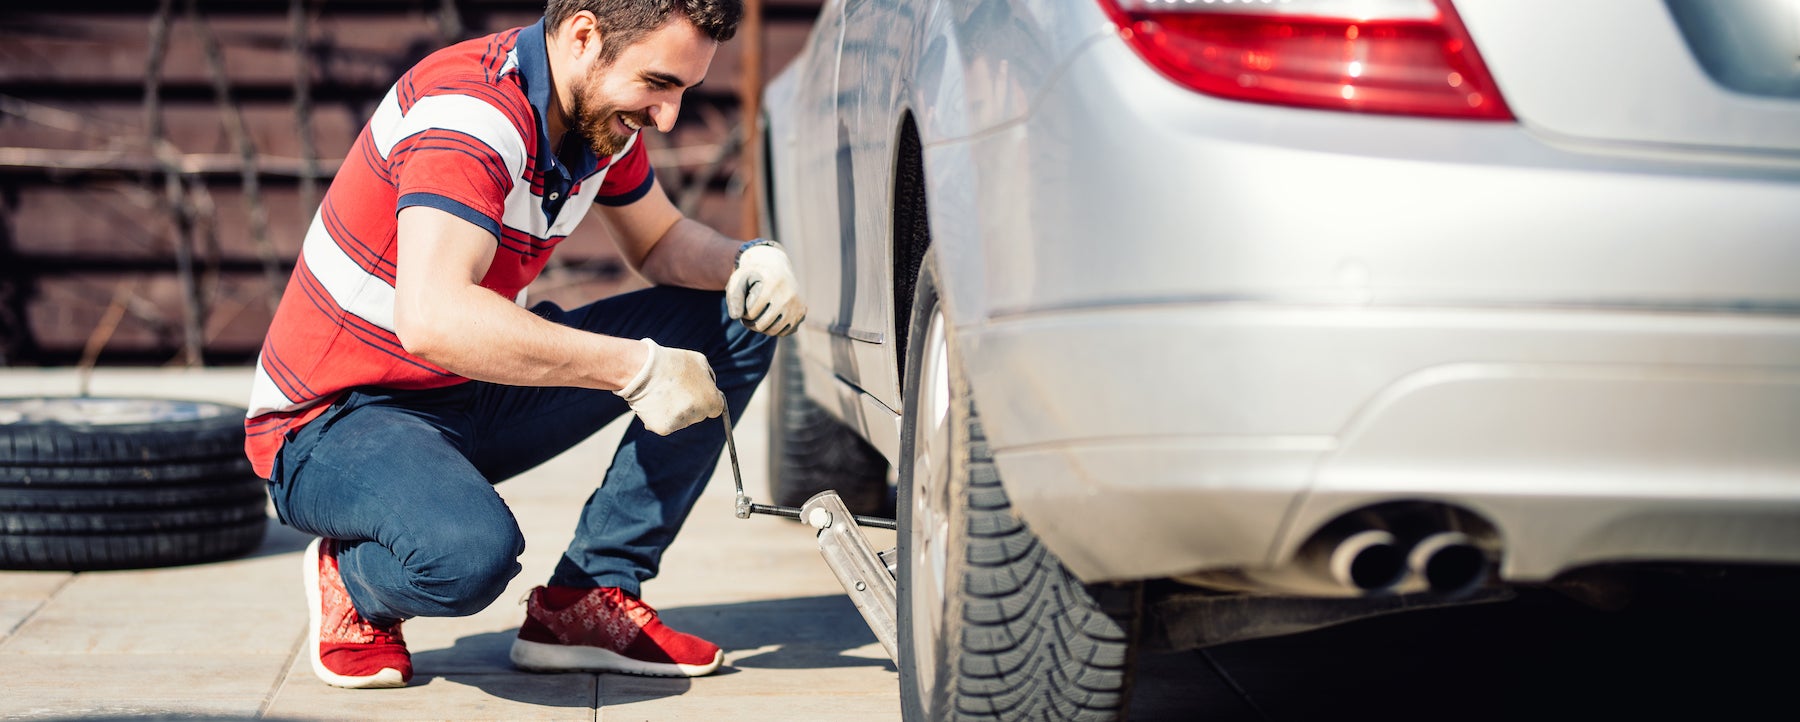 How to change a tire step-by-step guide at Fiore Toyota in Hollidaysburg | man changing car tire